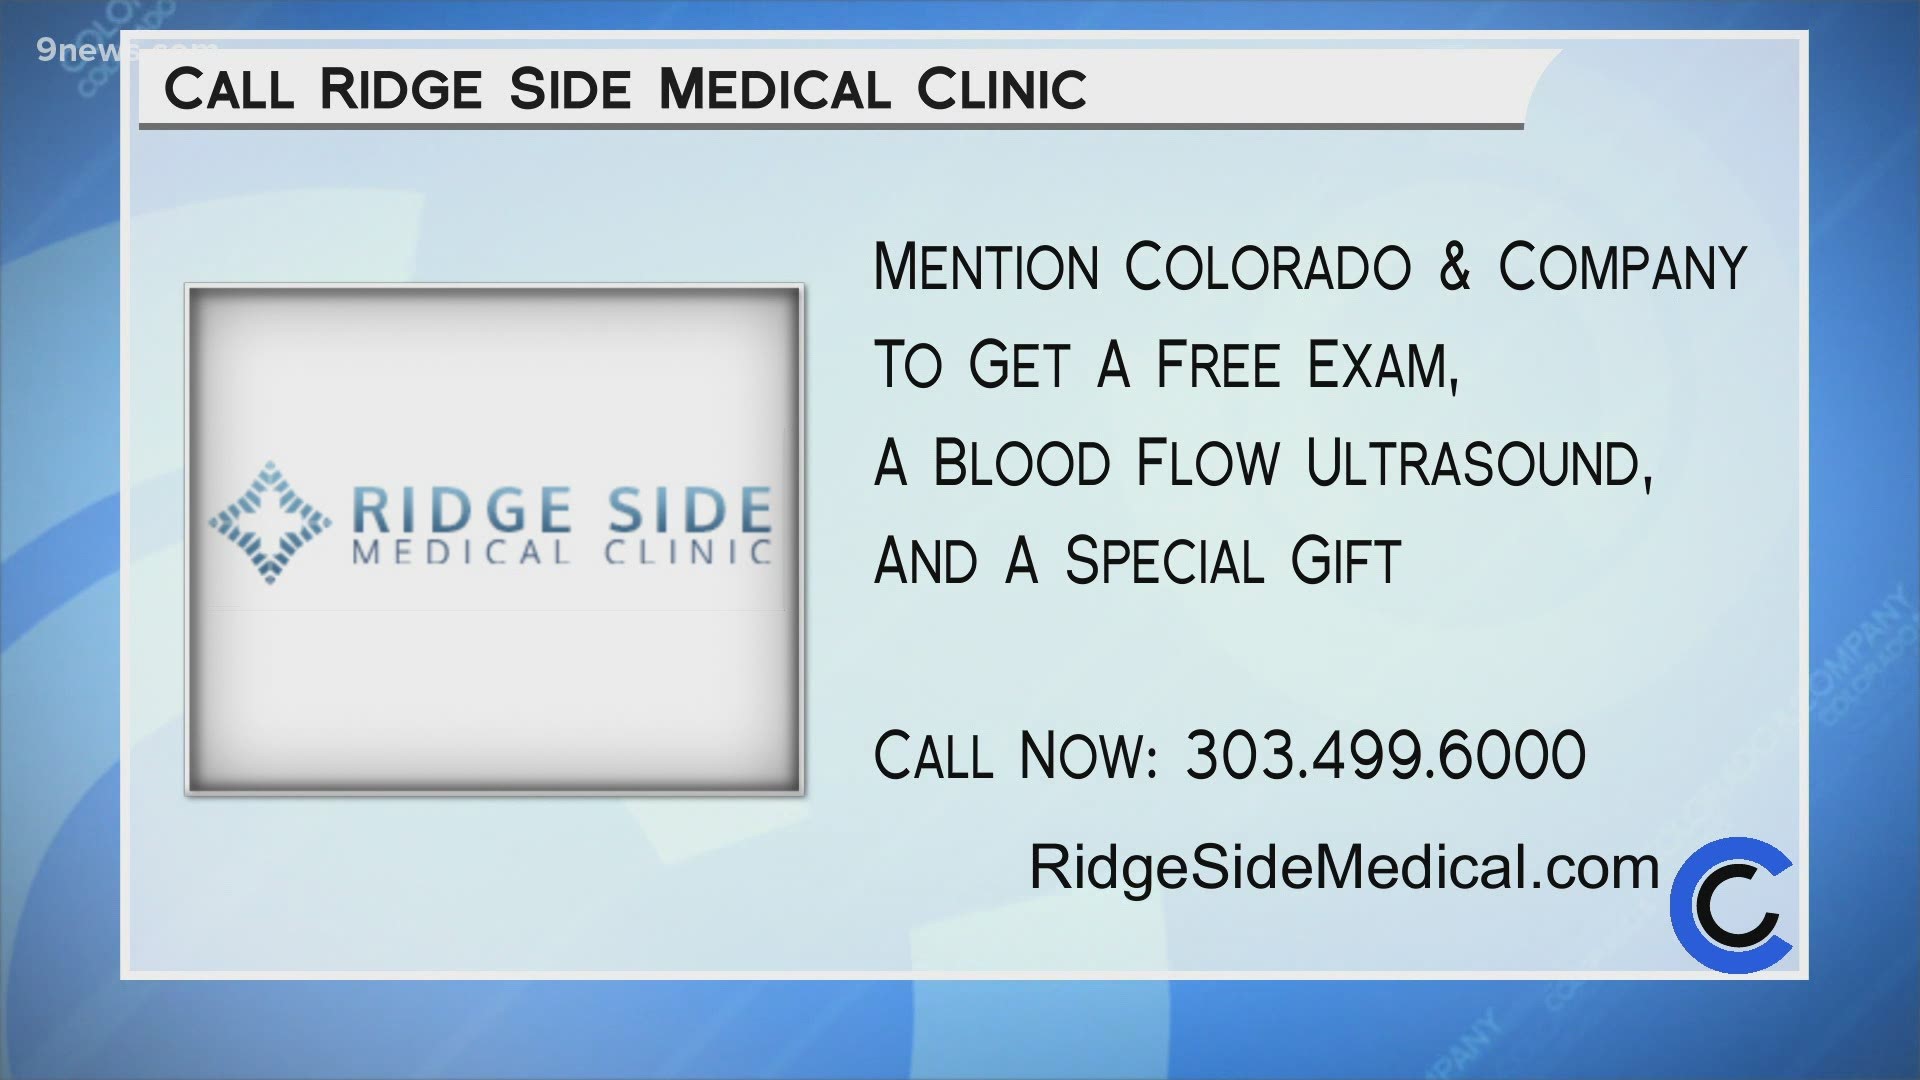 Give Ridge Side Medical Clinic a call at 303.499.6000. Mention COCO and get a free exam, blood flow ultrasound and special gift! Learn more at RidgeSideMedical.com.